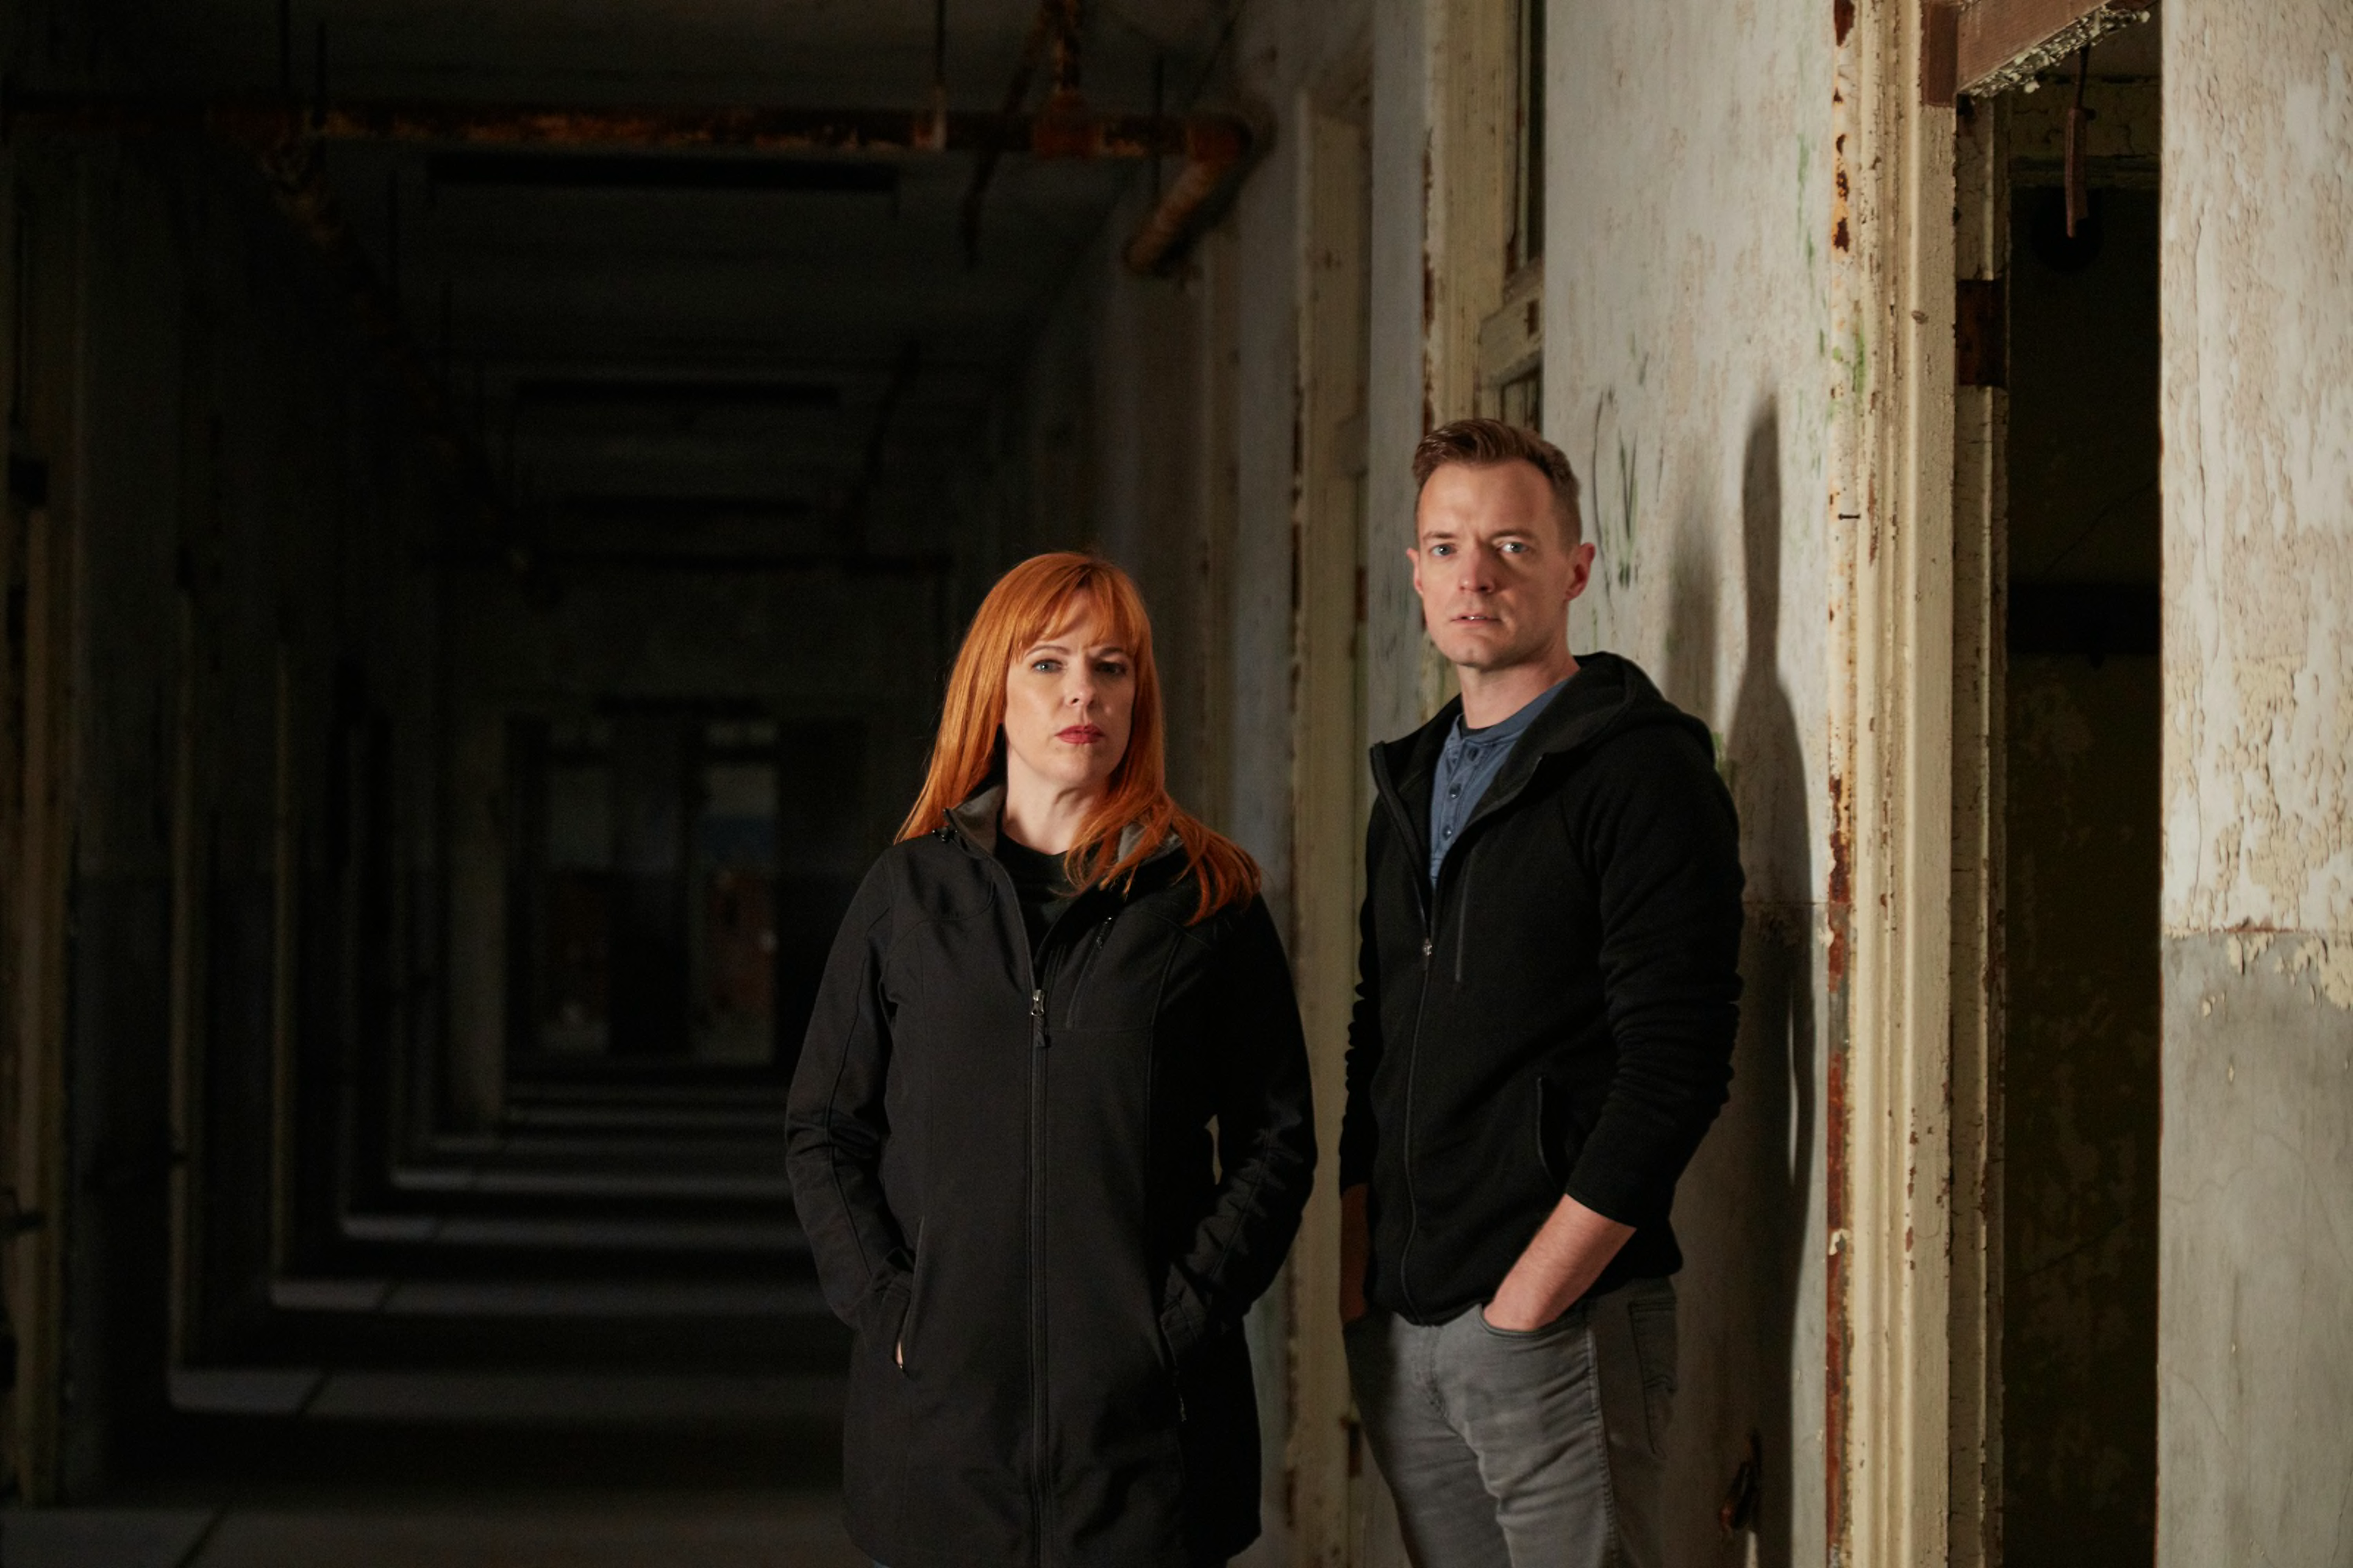 Kindred Spirits returns to Travel Channel for new season in January